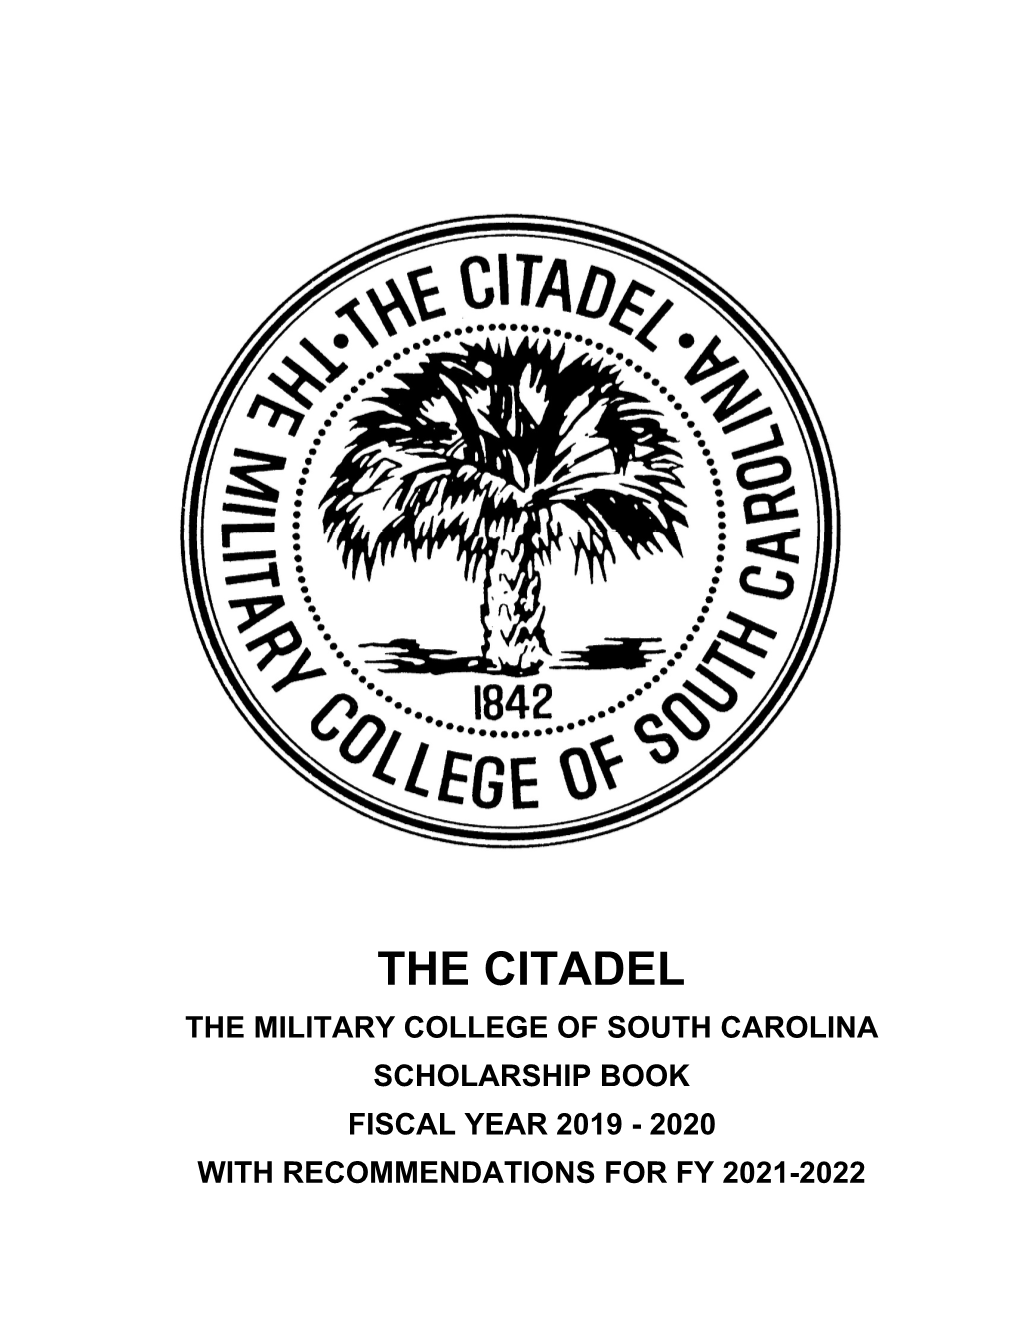 2020 with Recommendations for Fy 2021-2022 the Citadel Scholarship Book June 30, 2020